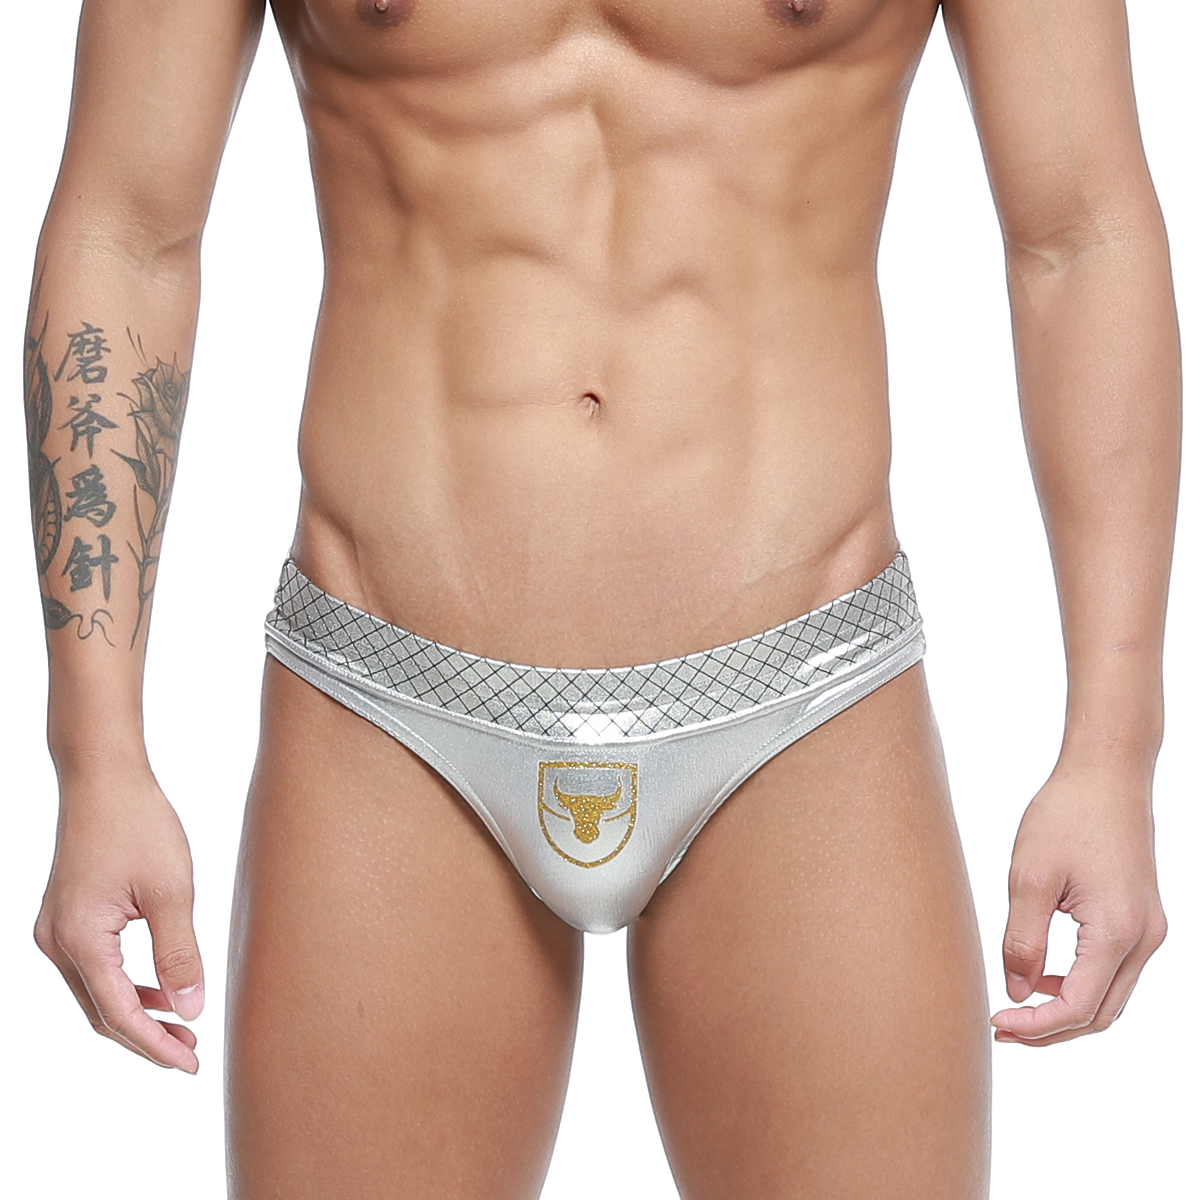 [MetroMuscleWear] Charles Competition Suit Silver (4974-37)